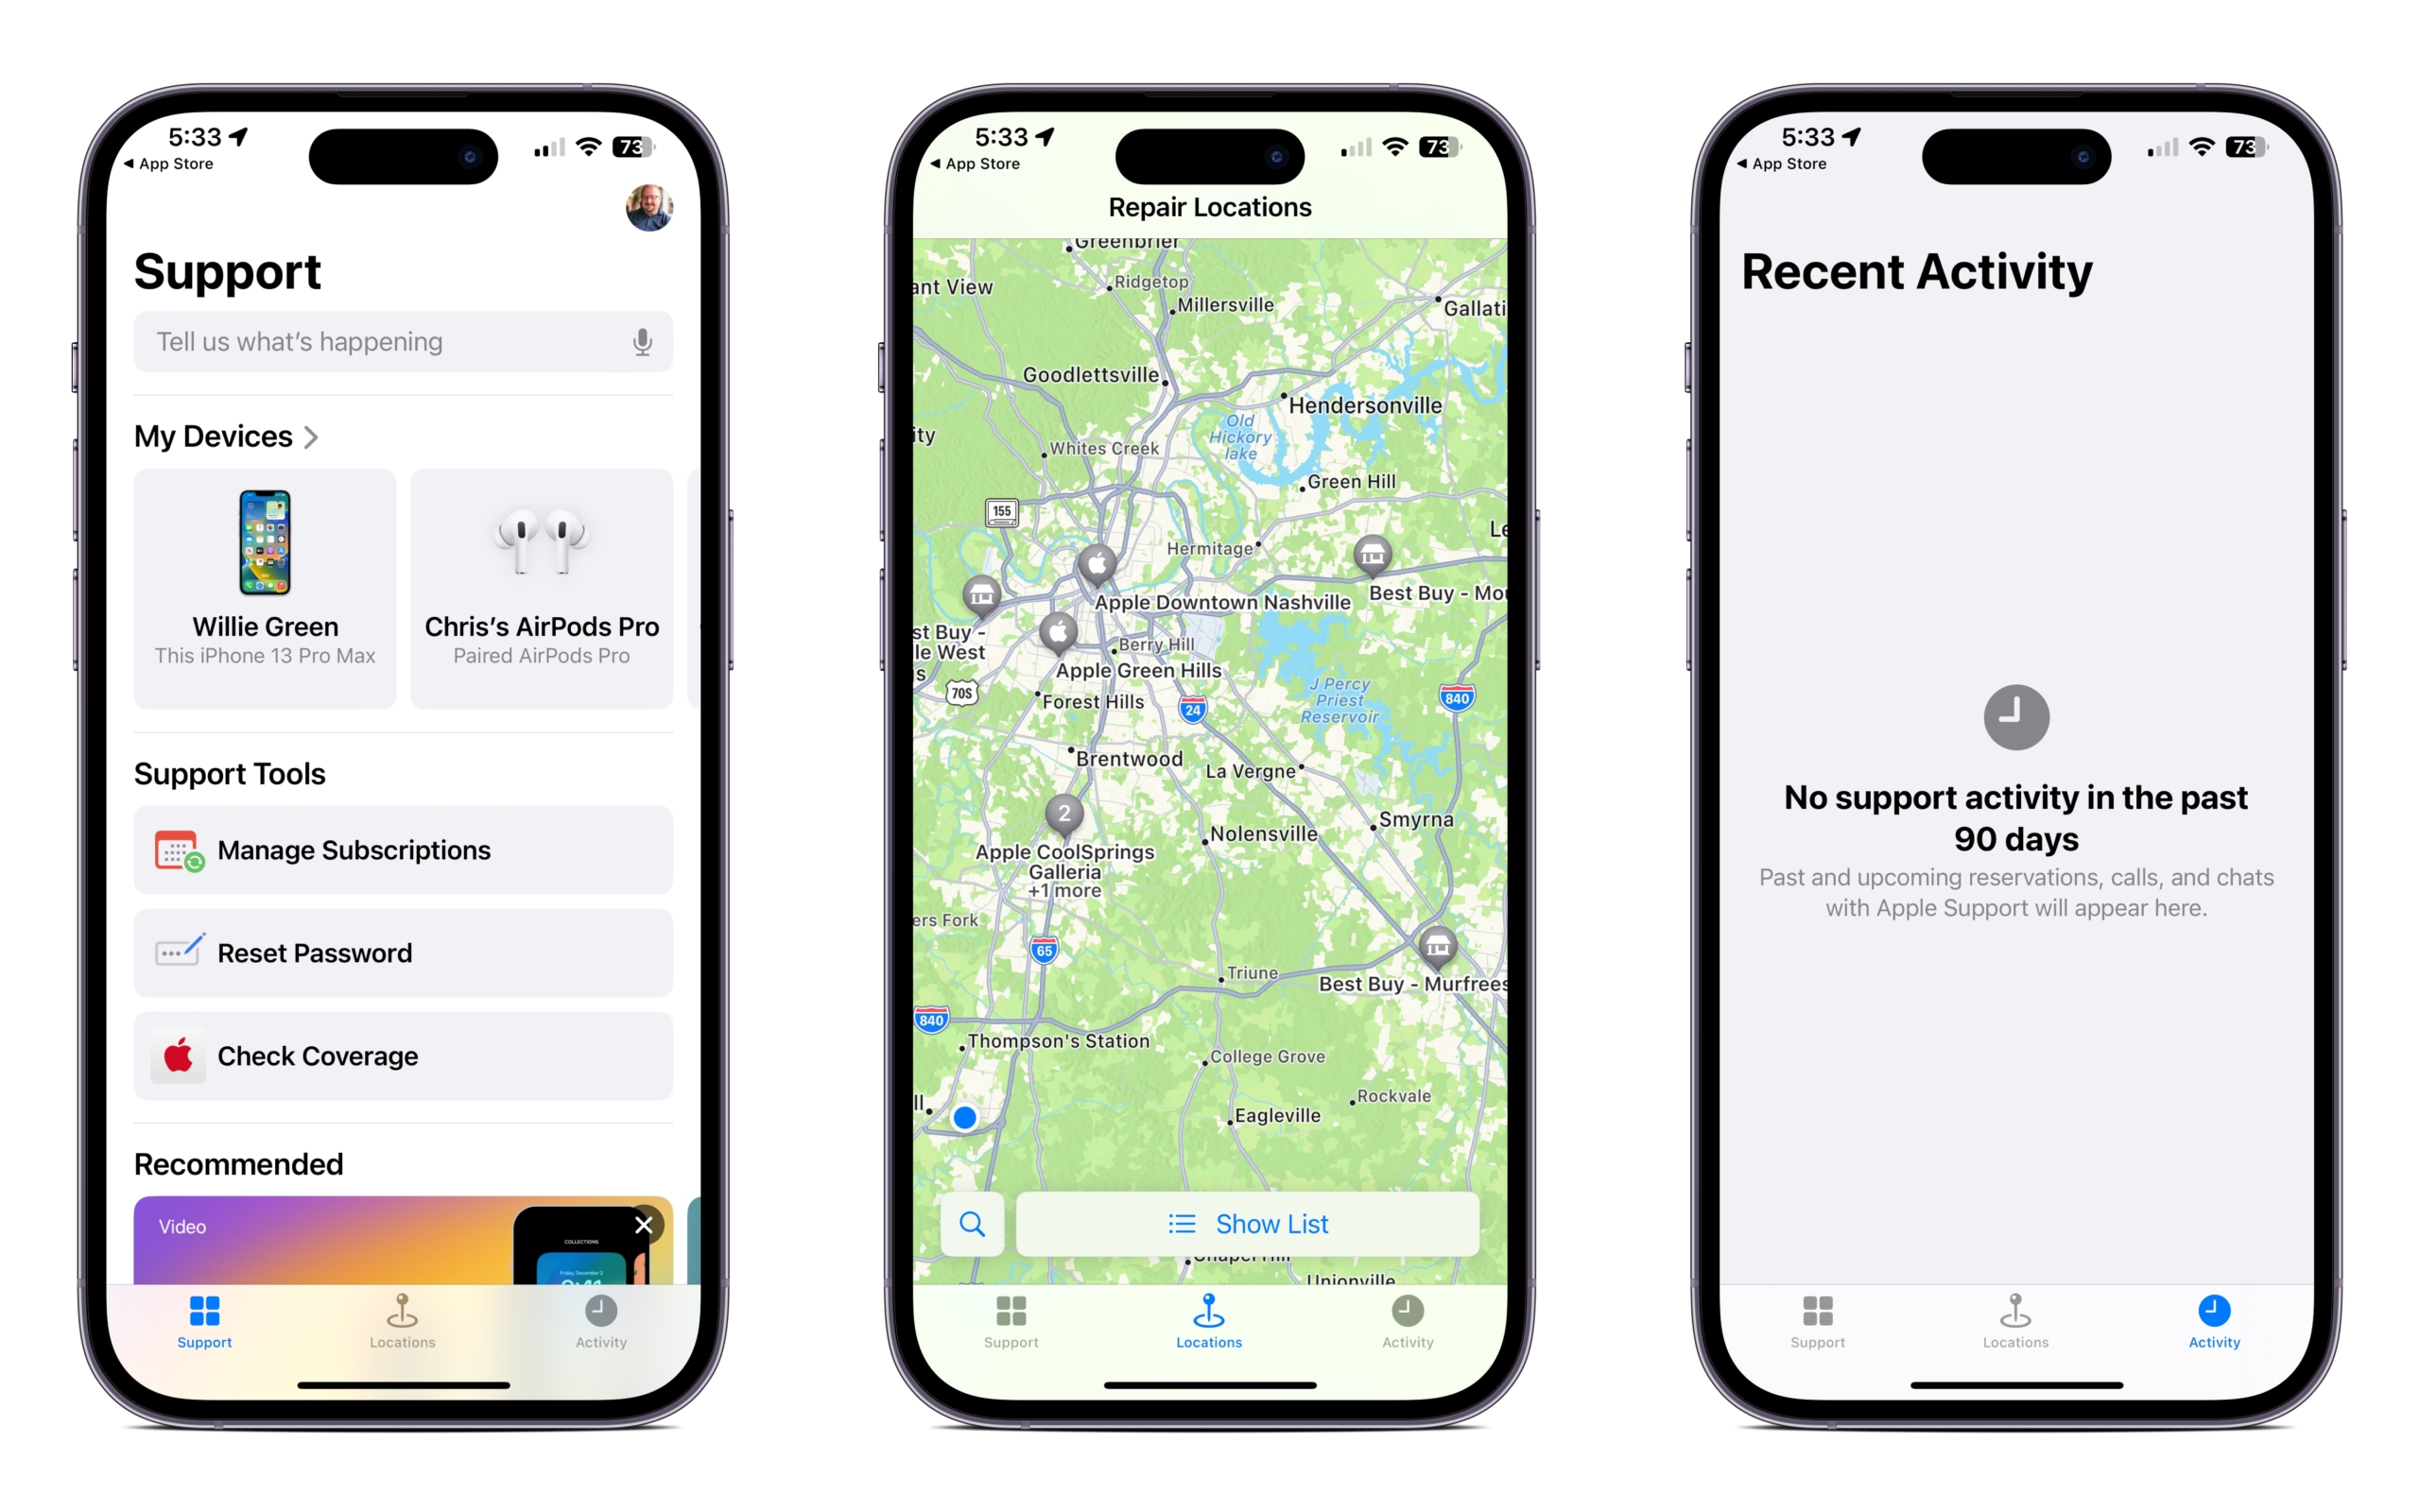 Apple Support App Gets Updated Layout And Provides Easier Access To